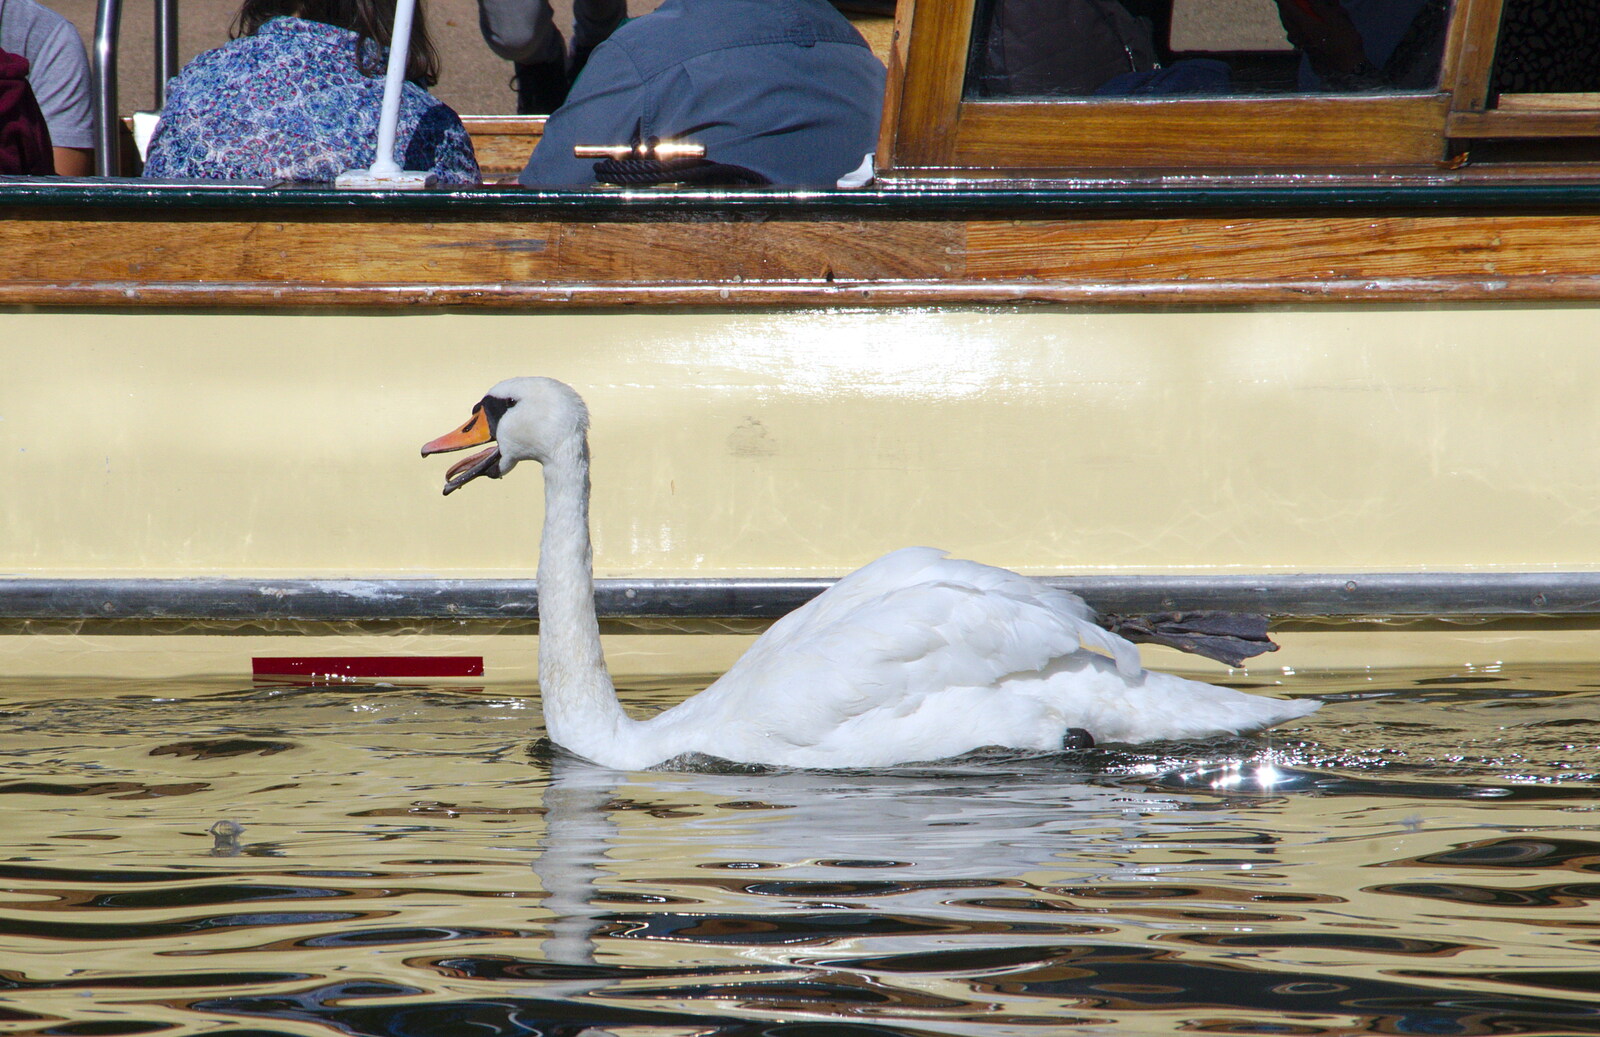 A swan does something weird with its beak and tongue from A Boat Trip on the River, Stratford upon Avon, Warwickshire - 14th September 2019